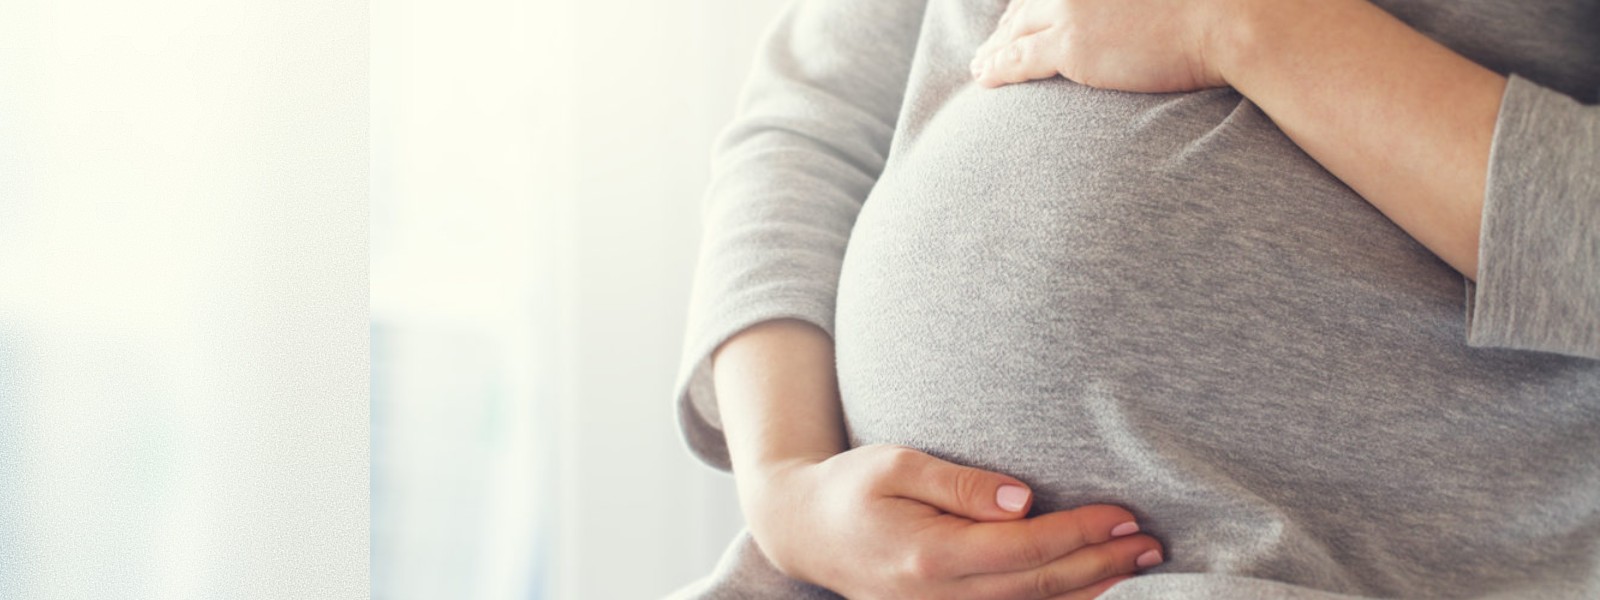 Rapid spread of COVID-19 among expectant mothers